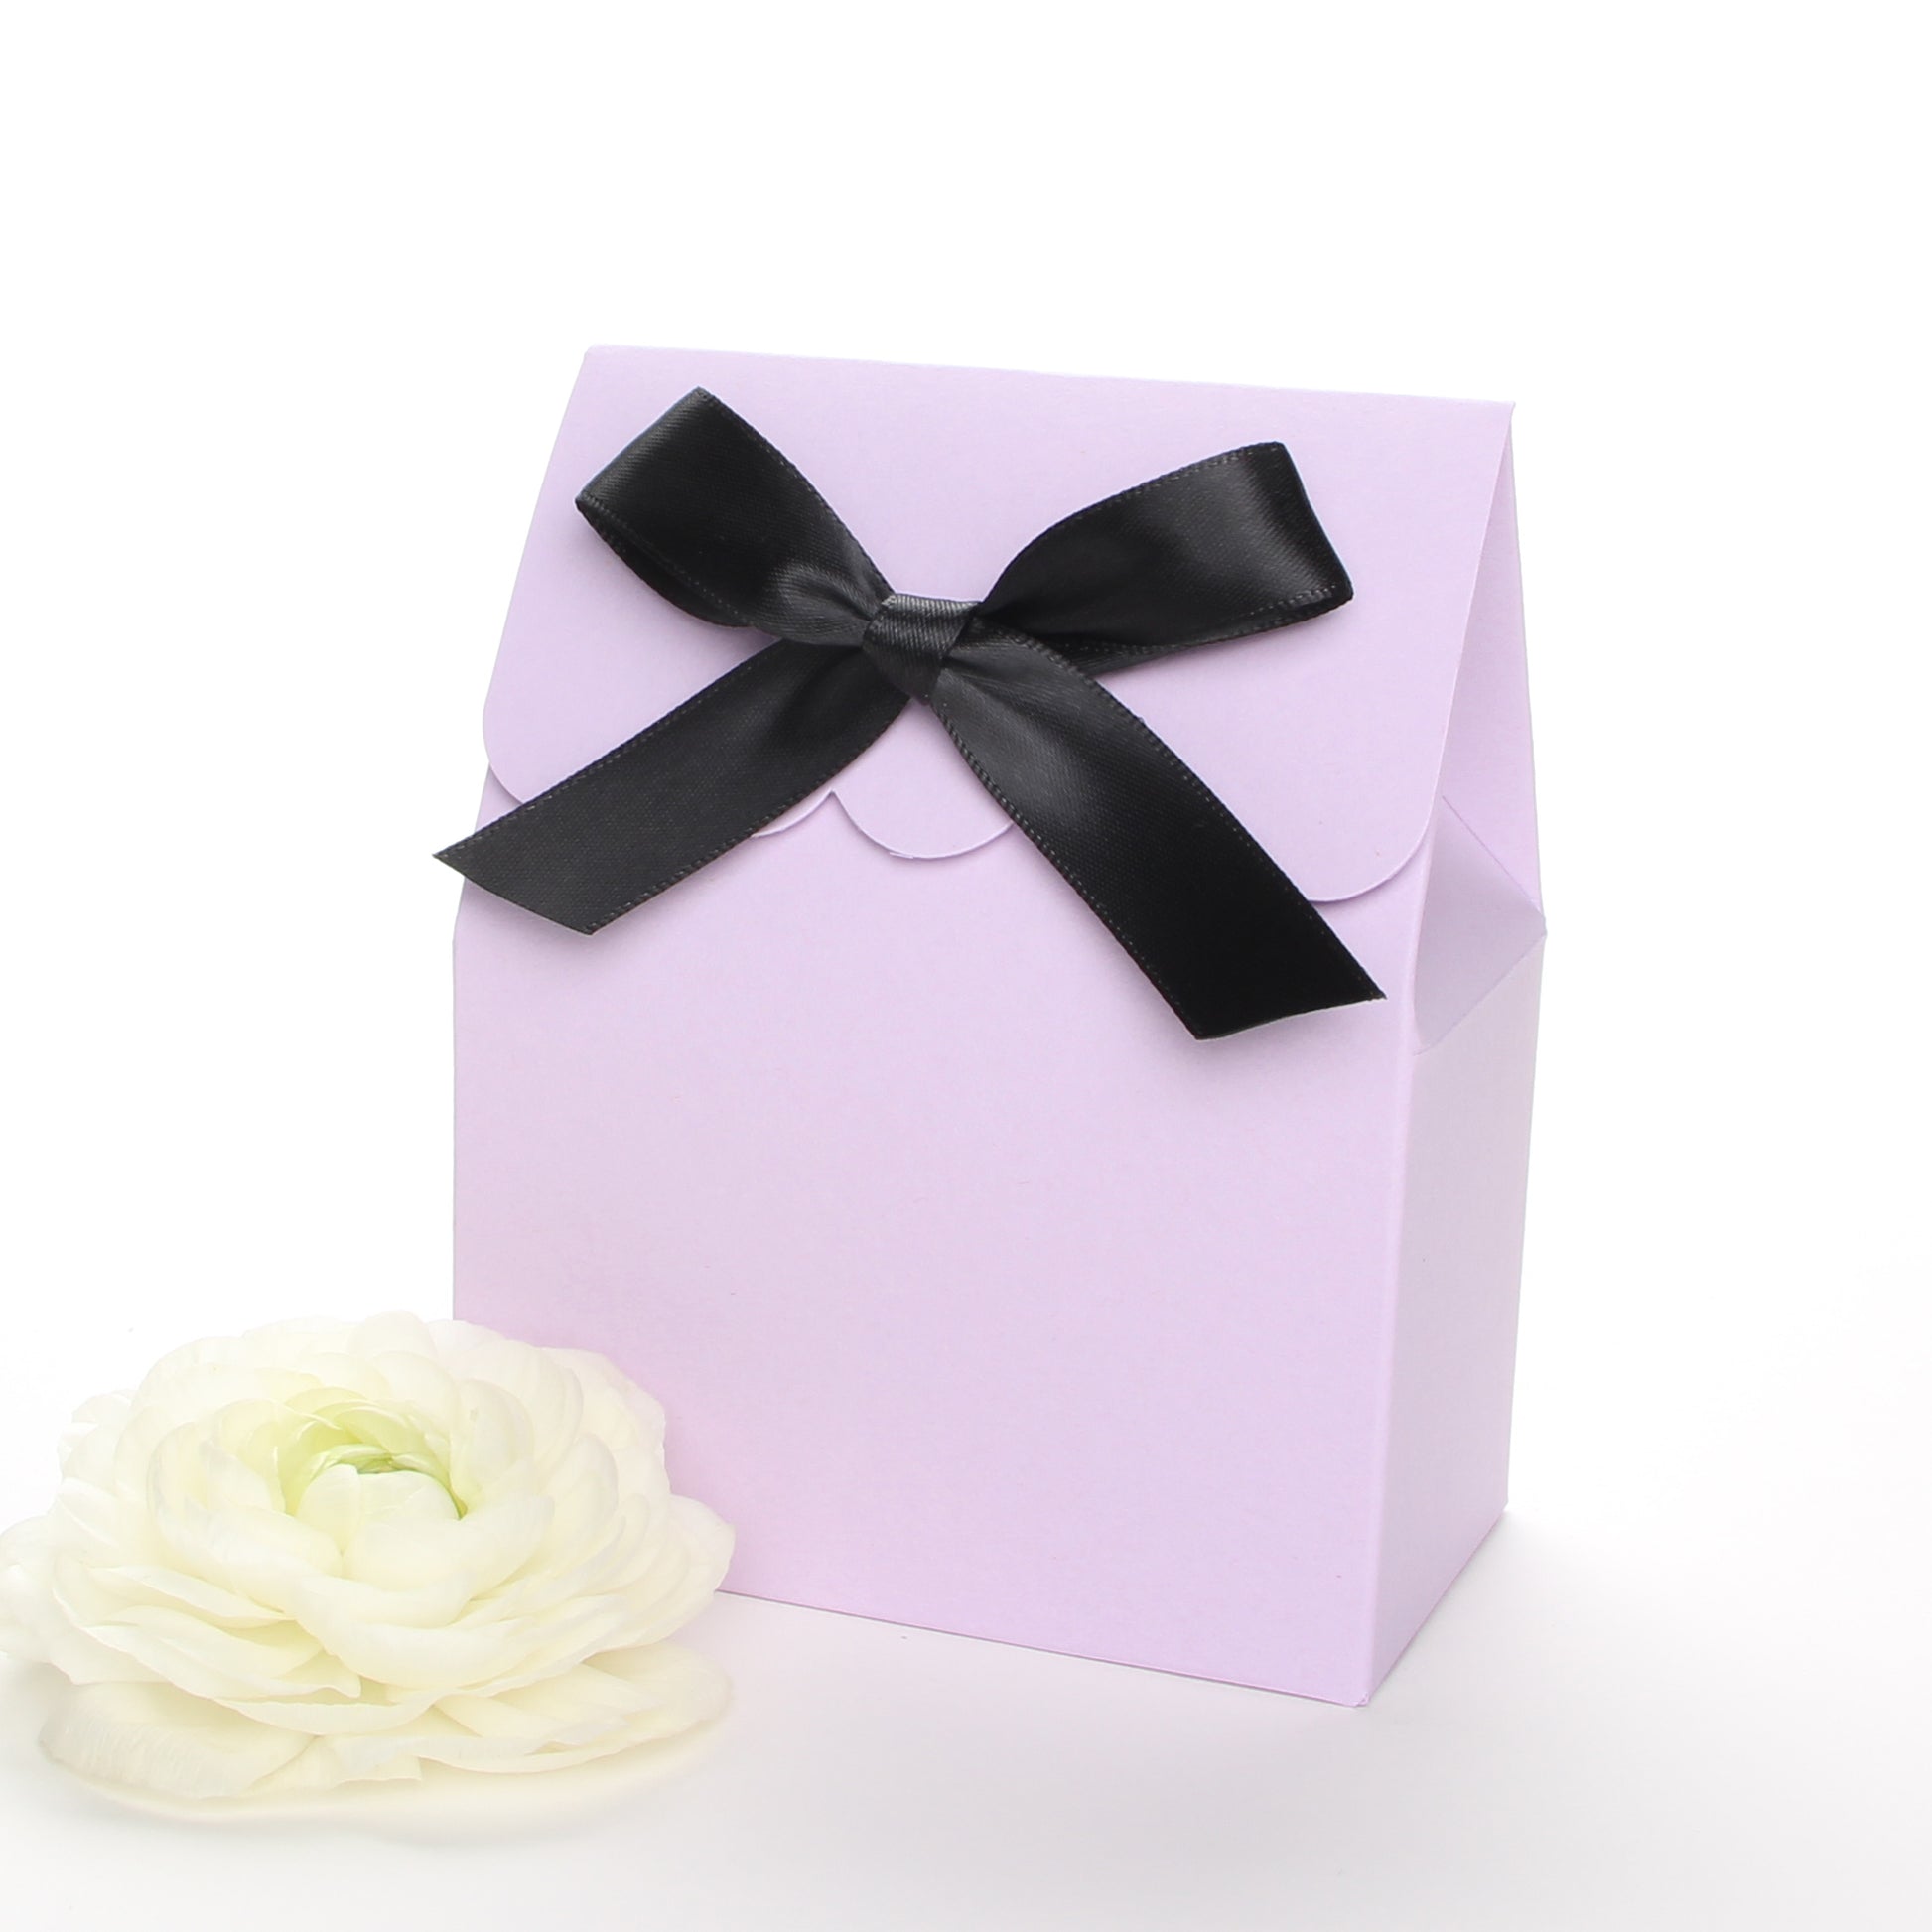 Lux Party’s lavender favor box with a scalloped edge and a black satin bow next to pink and white ranunculus flowers.